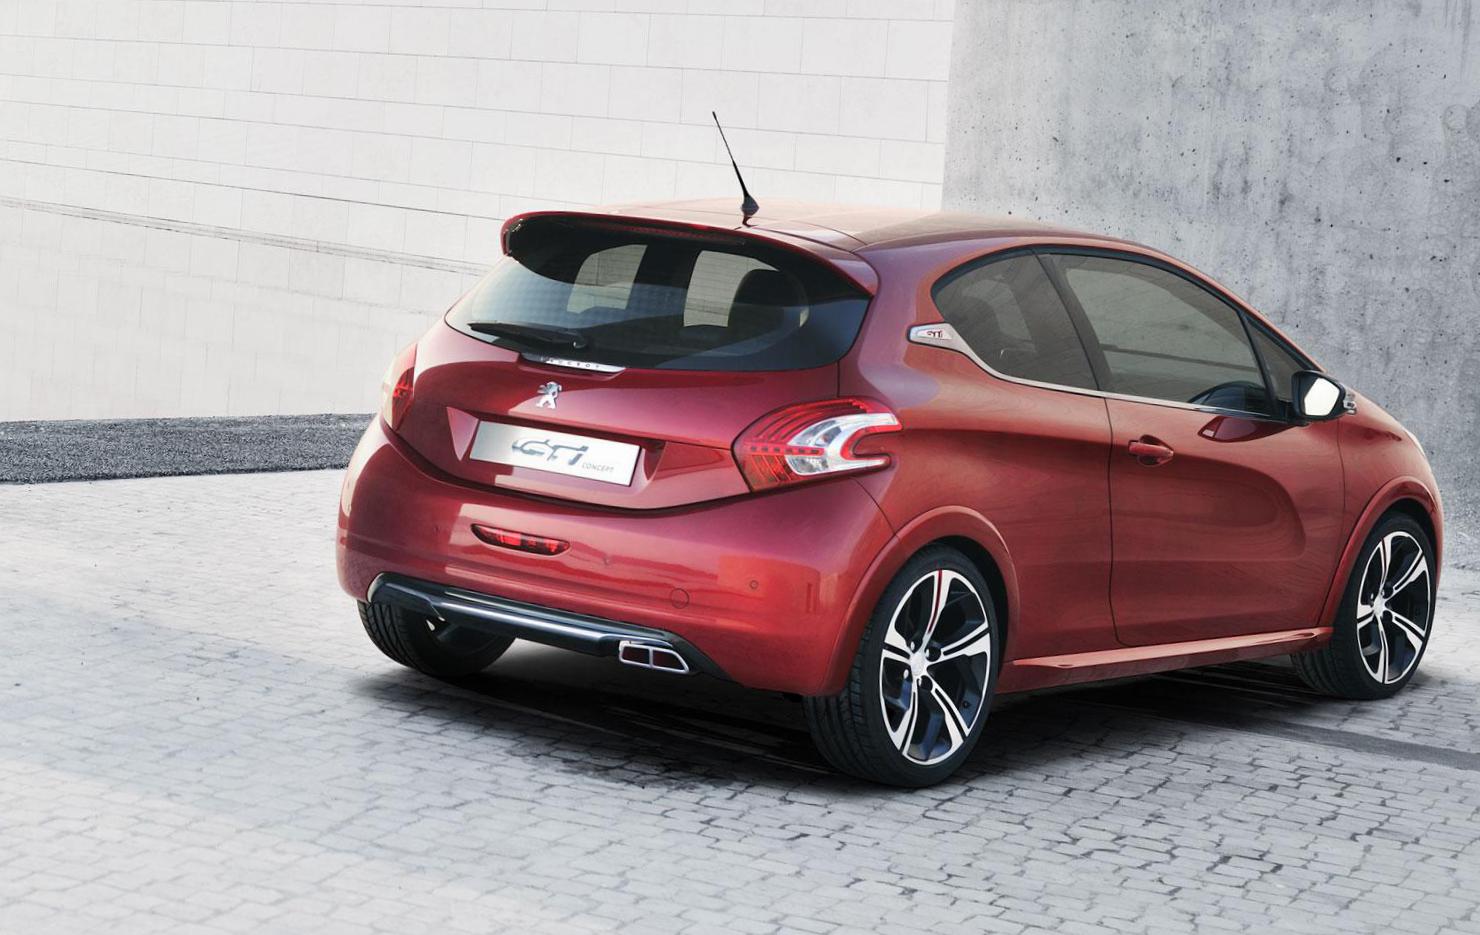 Peugeot 8 Gti Photos And Specs Photo Peugeot 8 Gti Approved And 26 Perfect Photos Of Peugeot 8 Gti